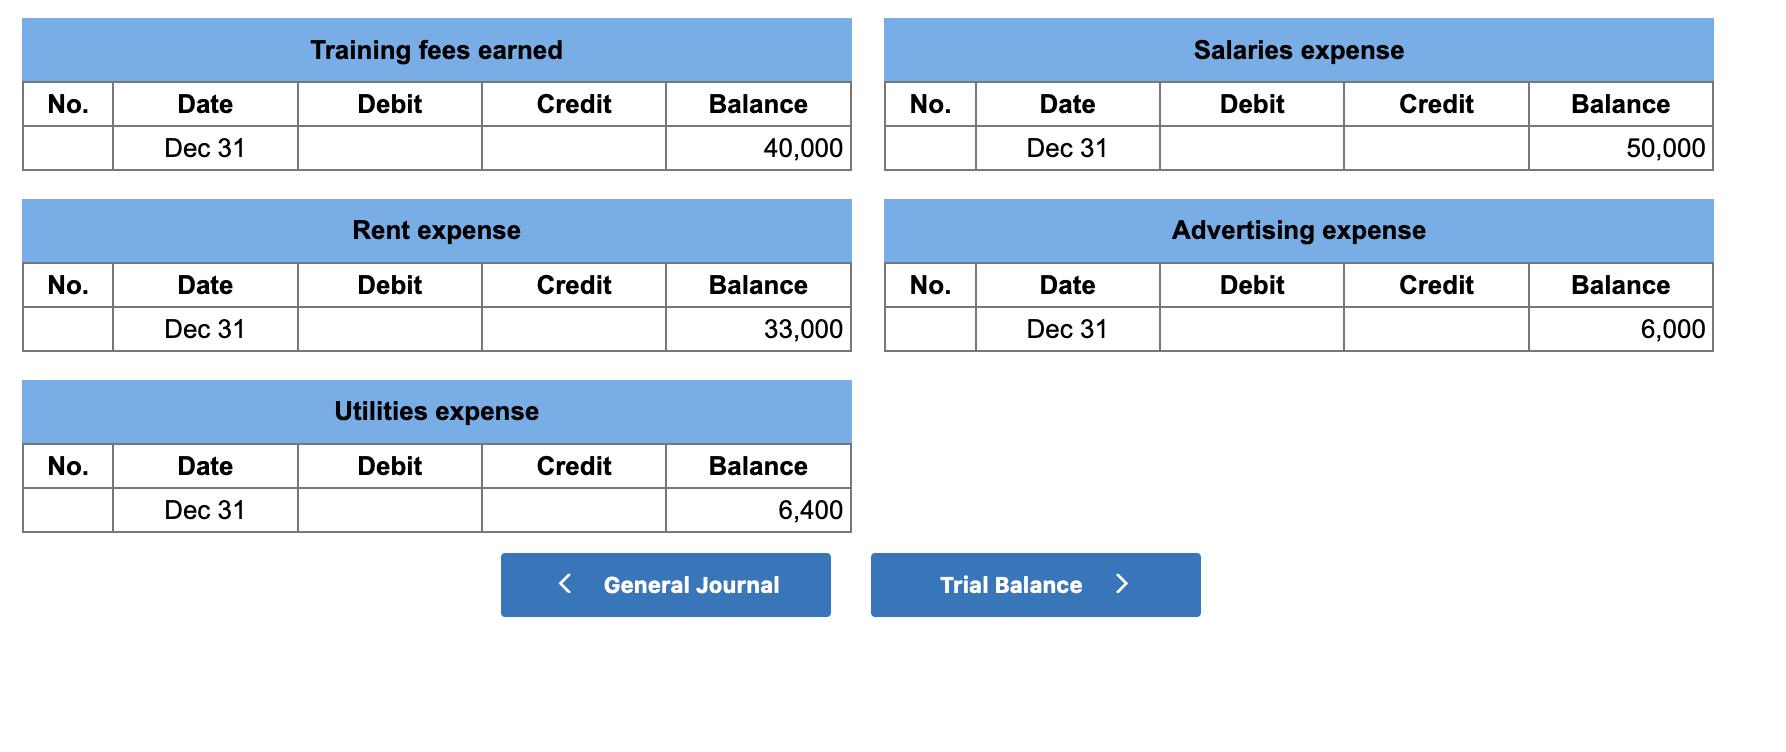 Training fees earned Salaries expense No. Date Debit Credit Balance No. Date Debit Credit Balance Dec 31 40,000 Dec 31 50,000